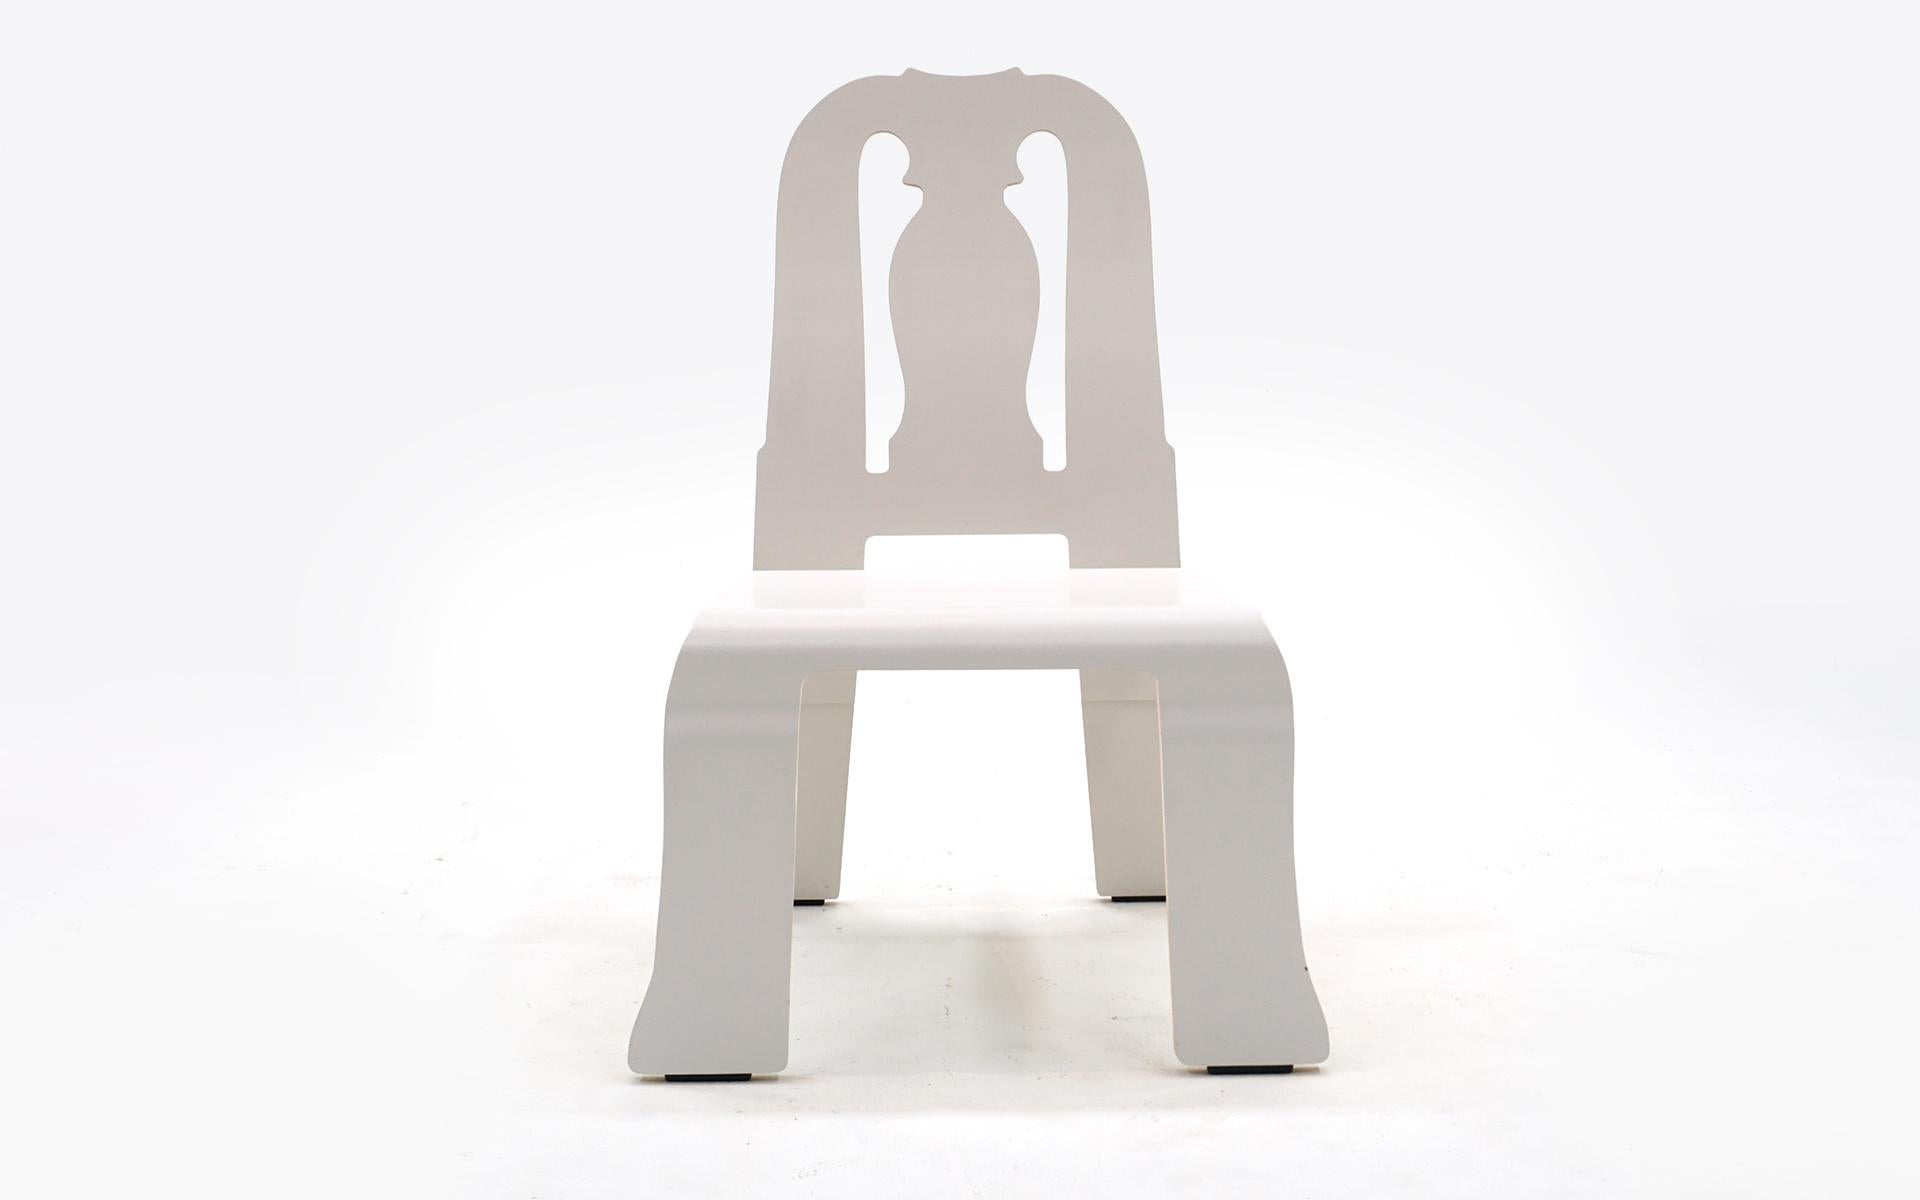 Rare white / ivory Queen Anne Chair designed by Robert Venturi and Denise Scott Brown. Great condition. Appears as though it has never been used. 

From Knoll: 